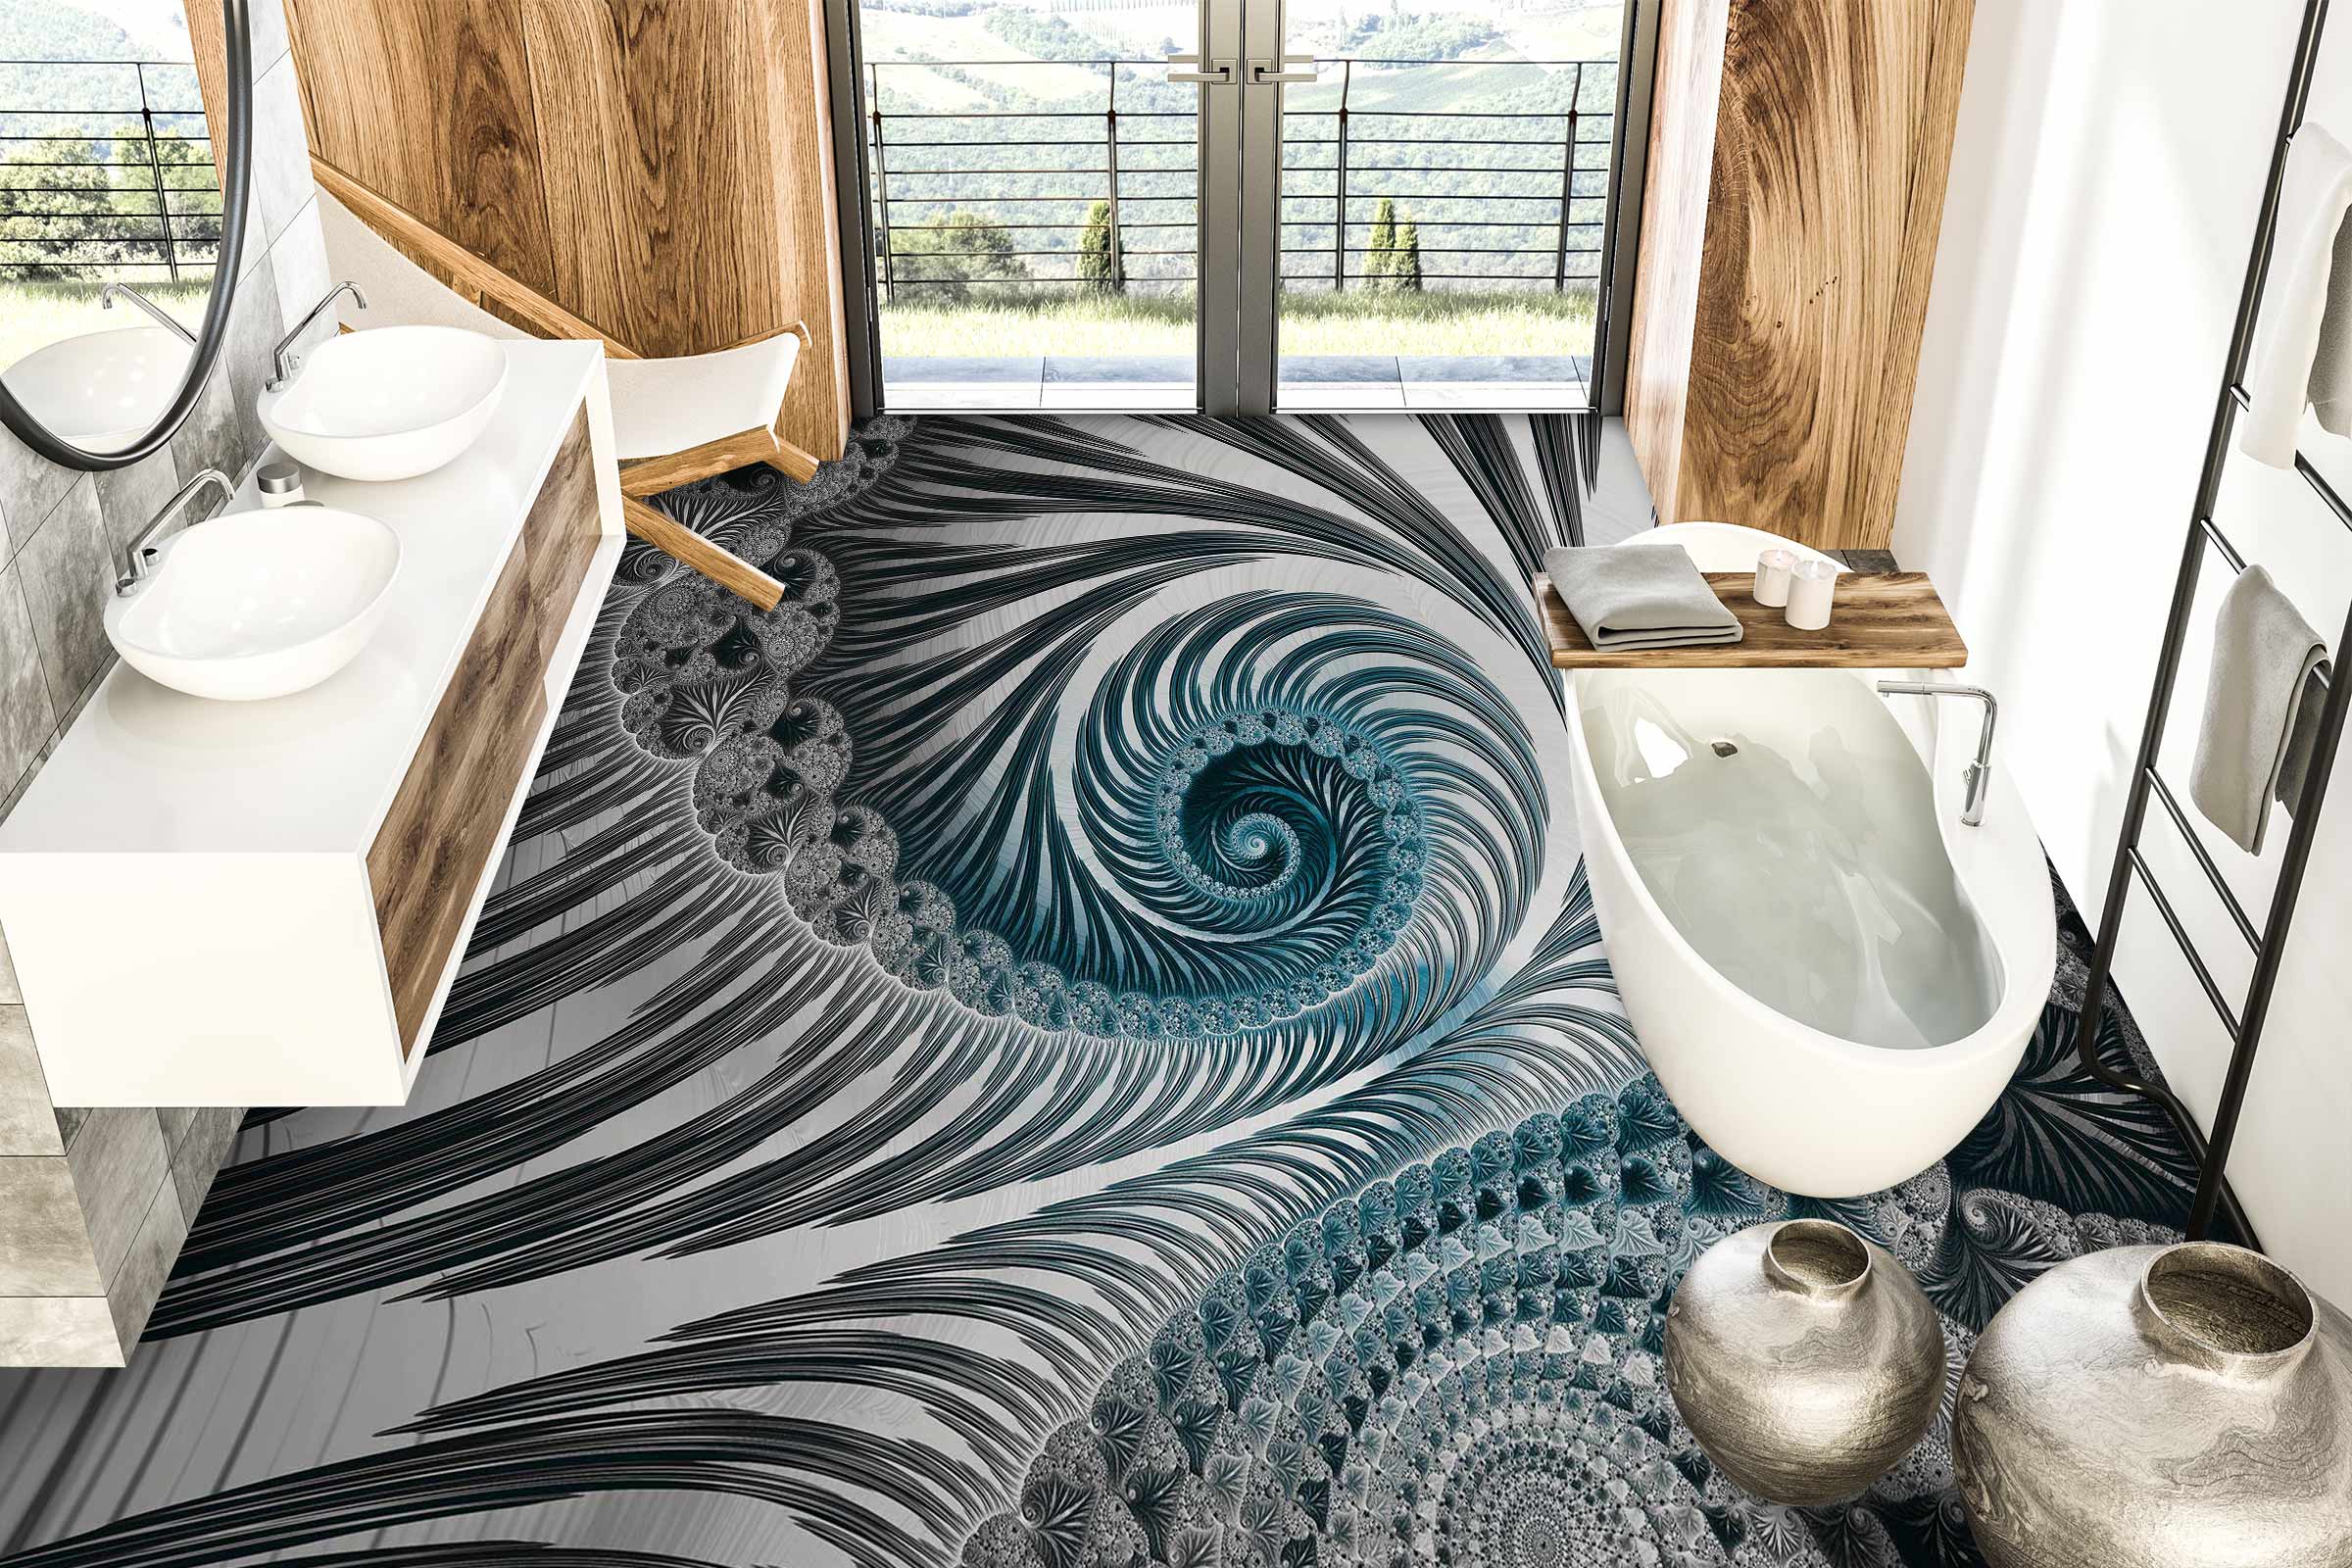 3D Thread Pattern 102149 Andrea Haase Floor Mural  Wallpaper Murals Self-Adhesive Removable Print Epoxy